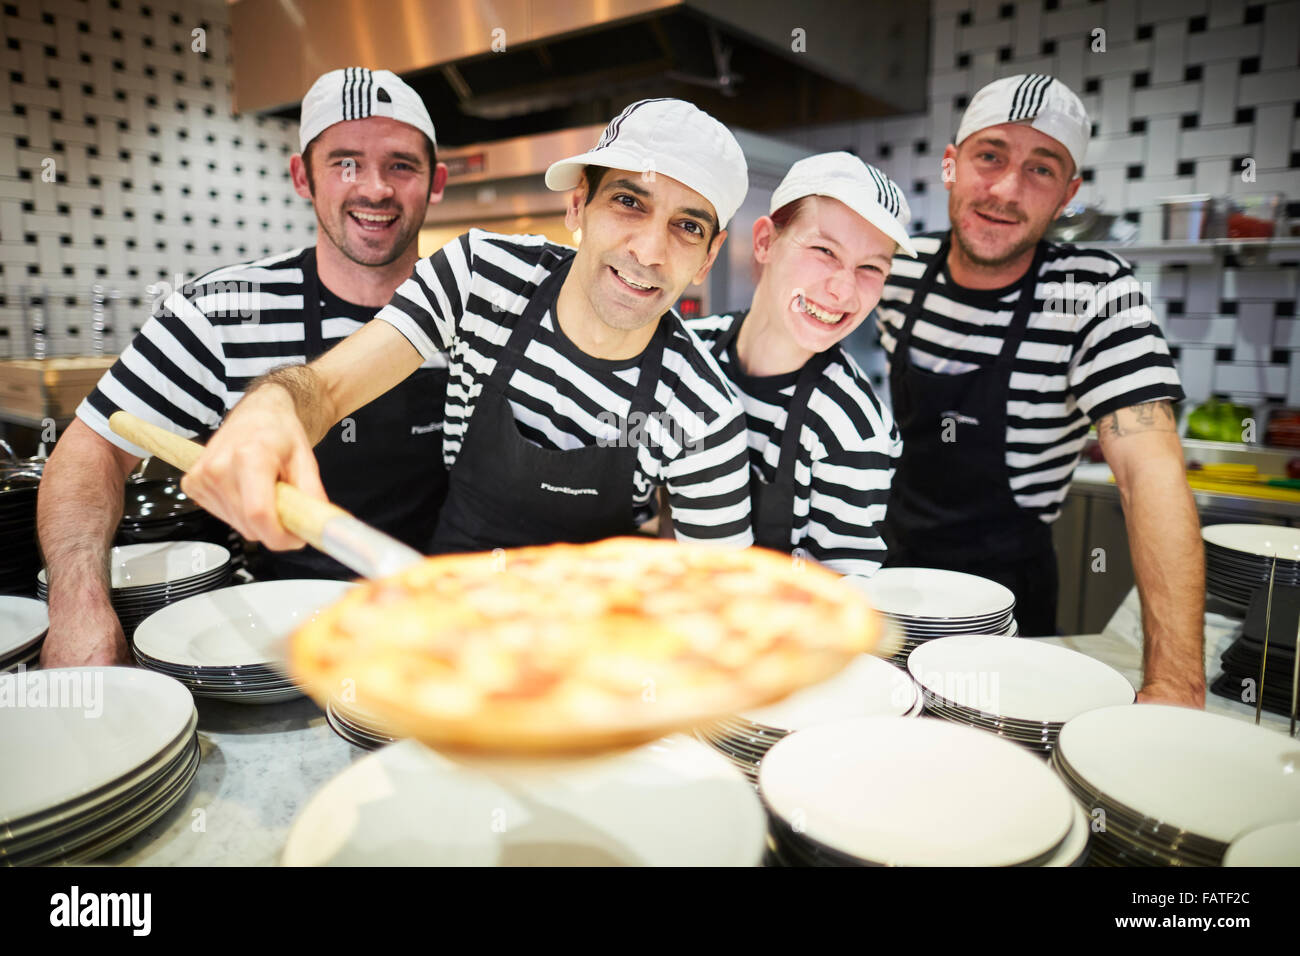 Pizza Express restaurant opens in the White Rose Shopping Centre in Leeds Yorkshire   Pizzaiolos pizza chefs  American pizza on Stock Photo